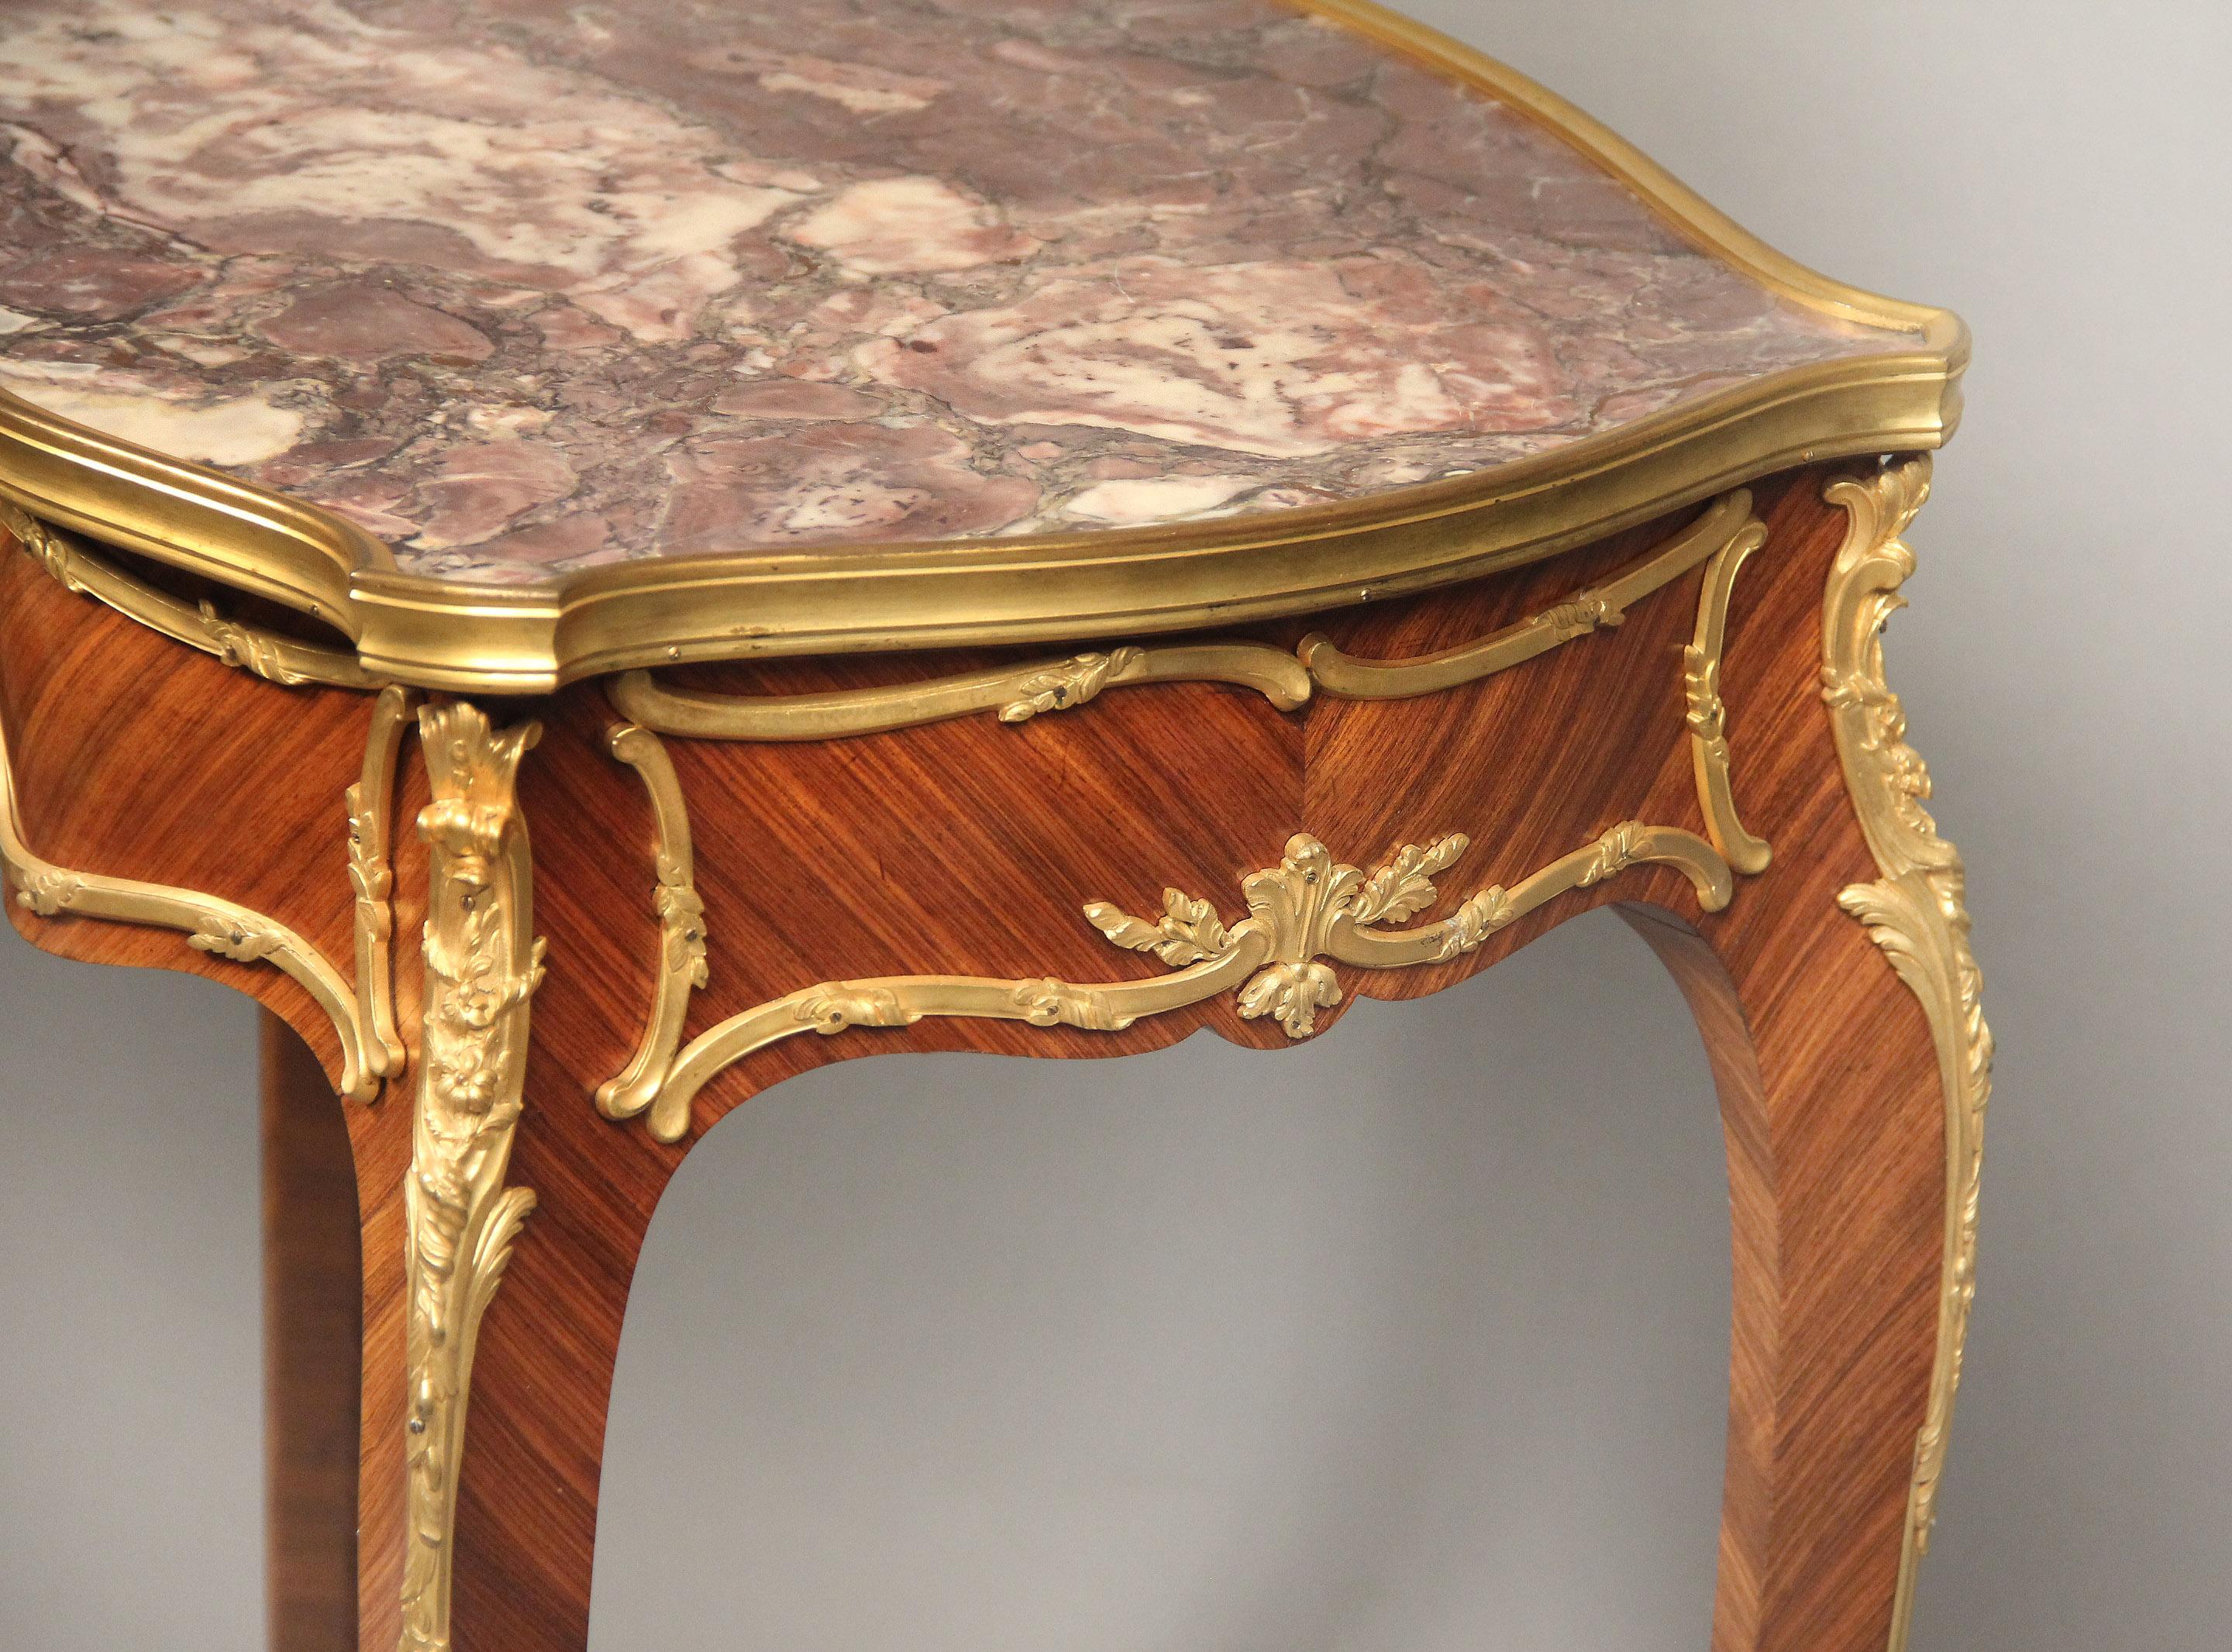 Belle Époque Fine Early 20th Century Gilt Bronze Mounted Side/Writing Table by François Linke For Sale